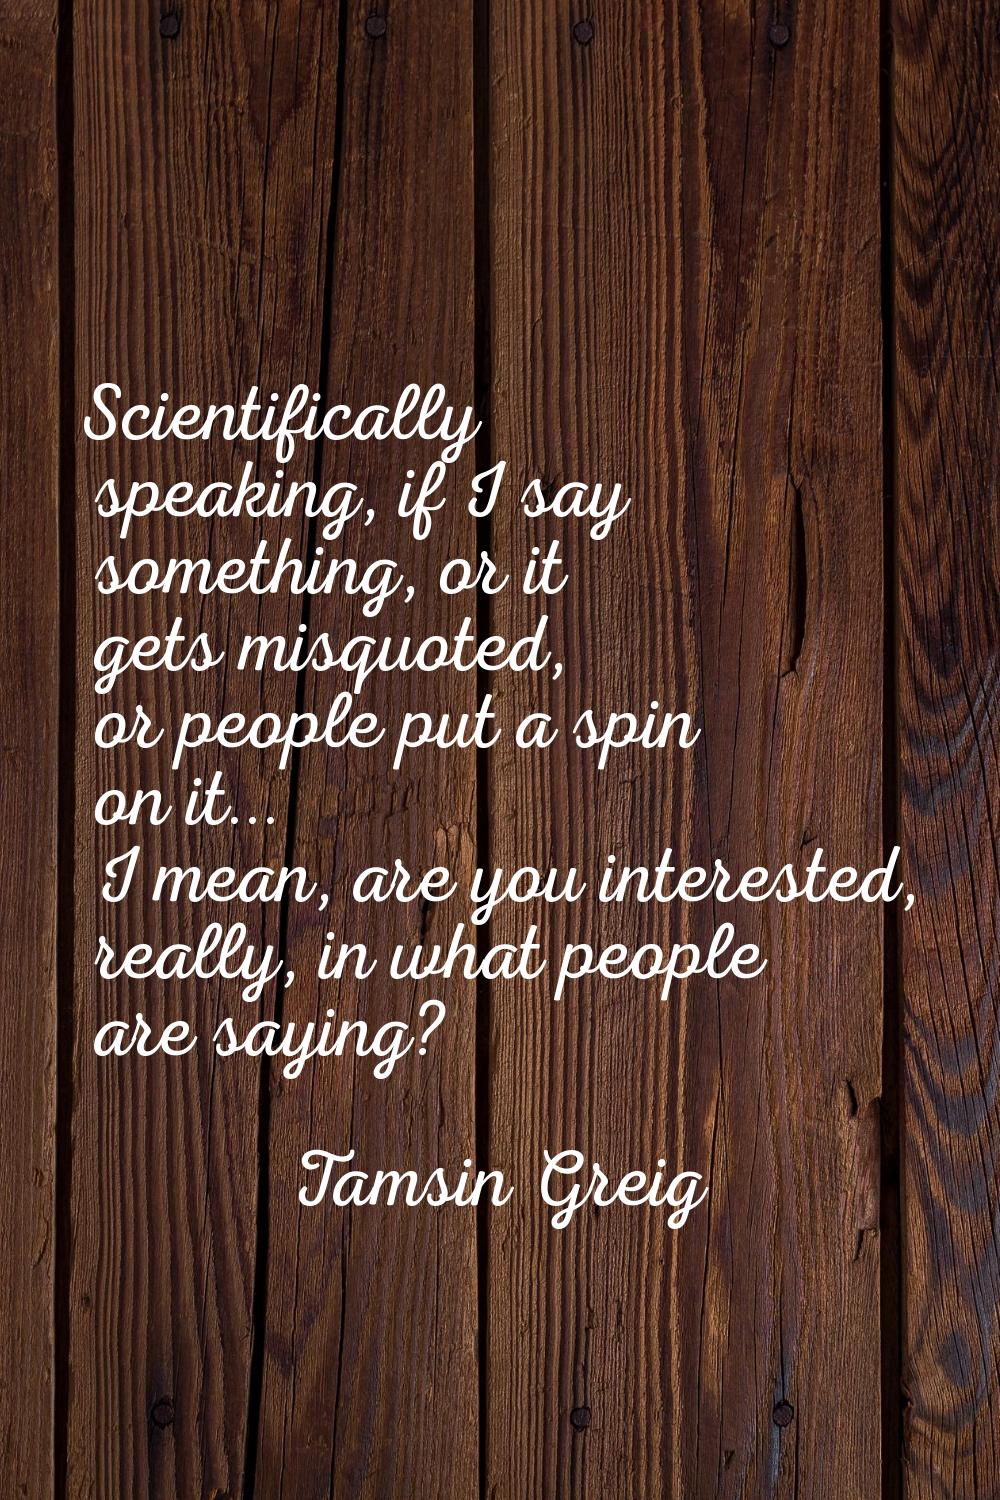 Scientifically speaking, if I say something, or it gets misquoted, or people put a spin on it... I 